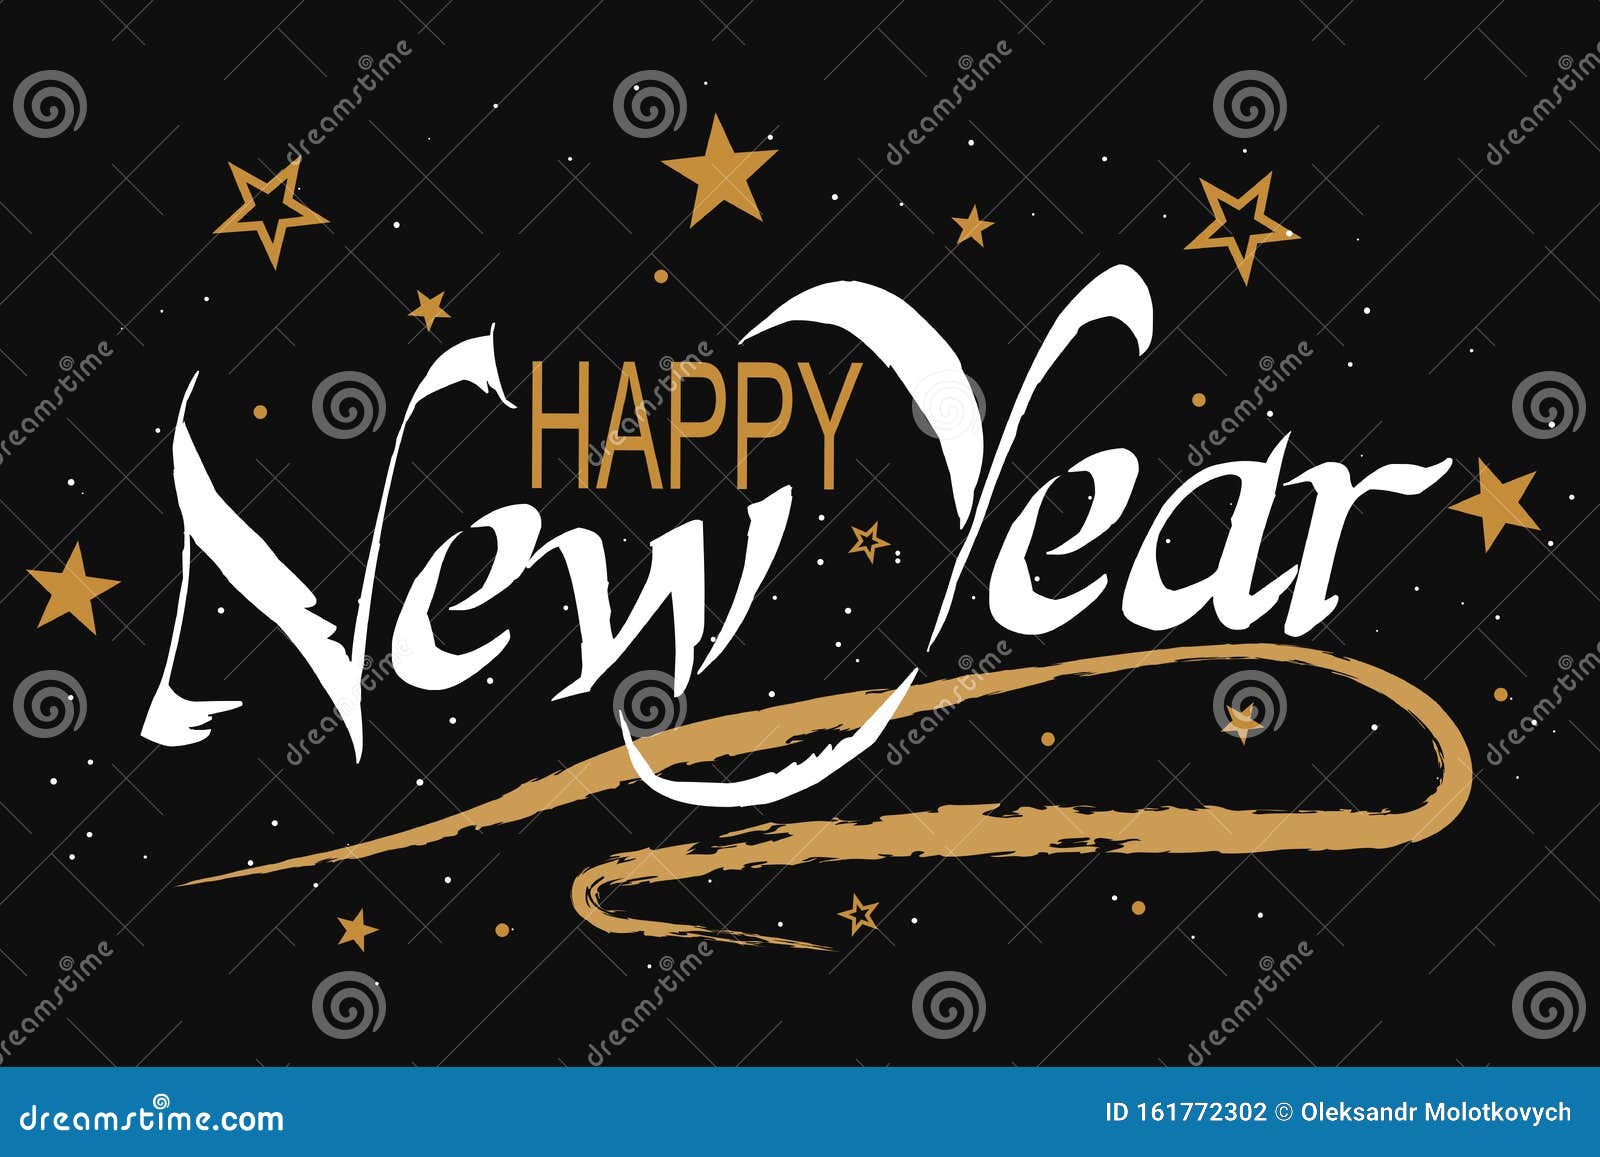 Happy New Year 2020 Beautiful Golden Background Design. Template ...